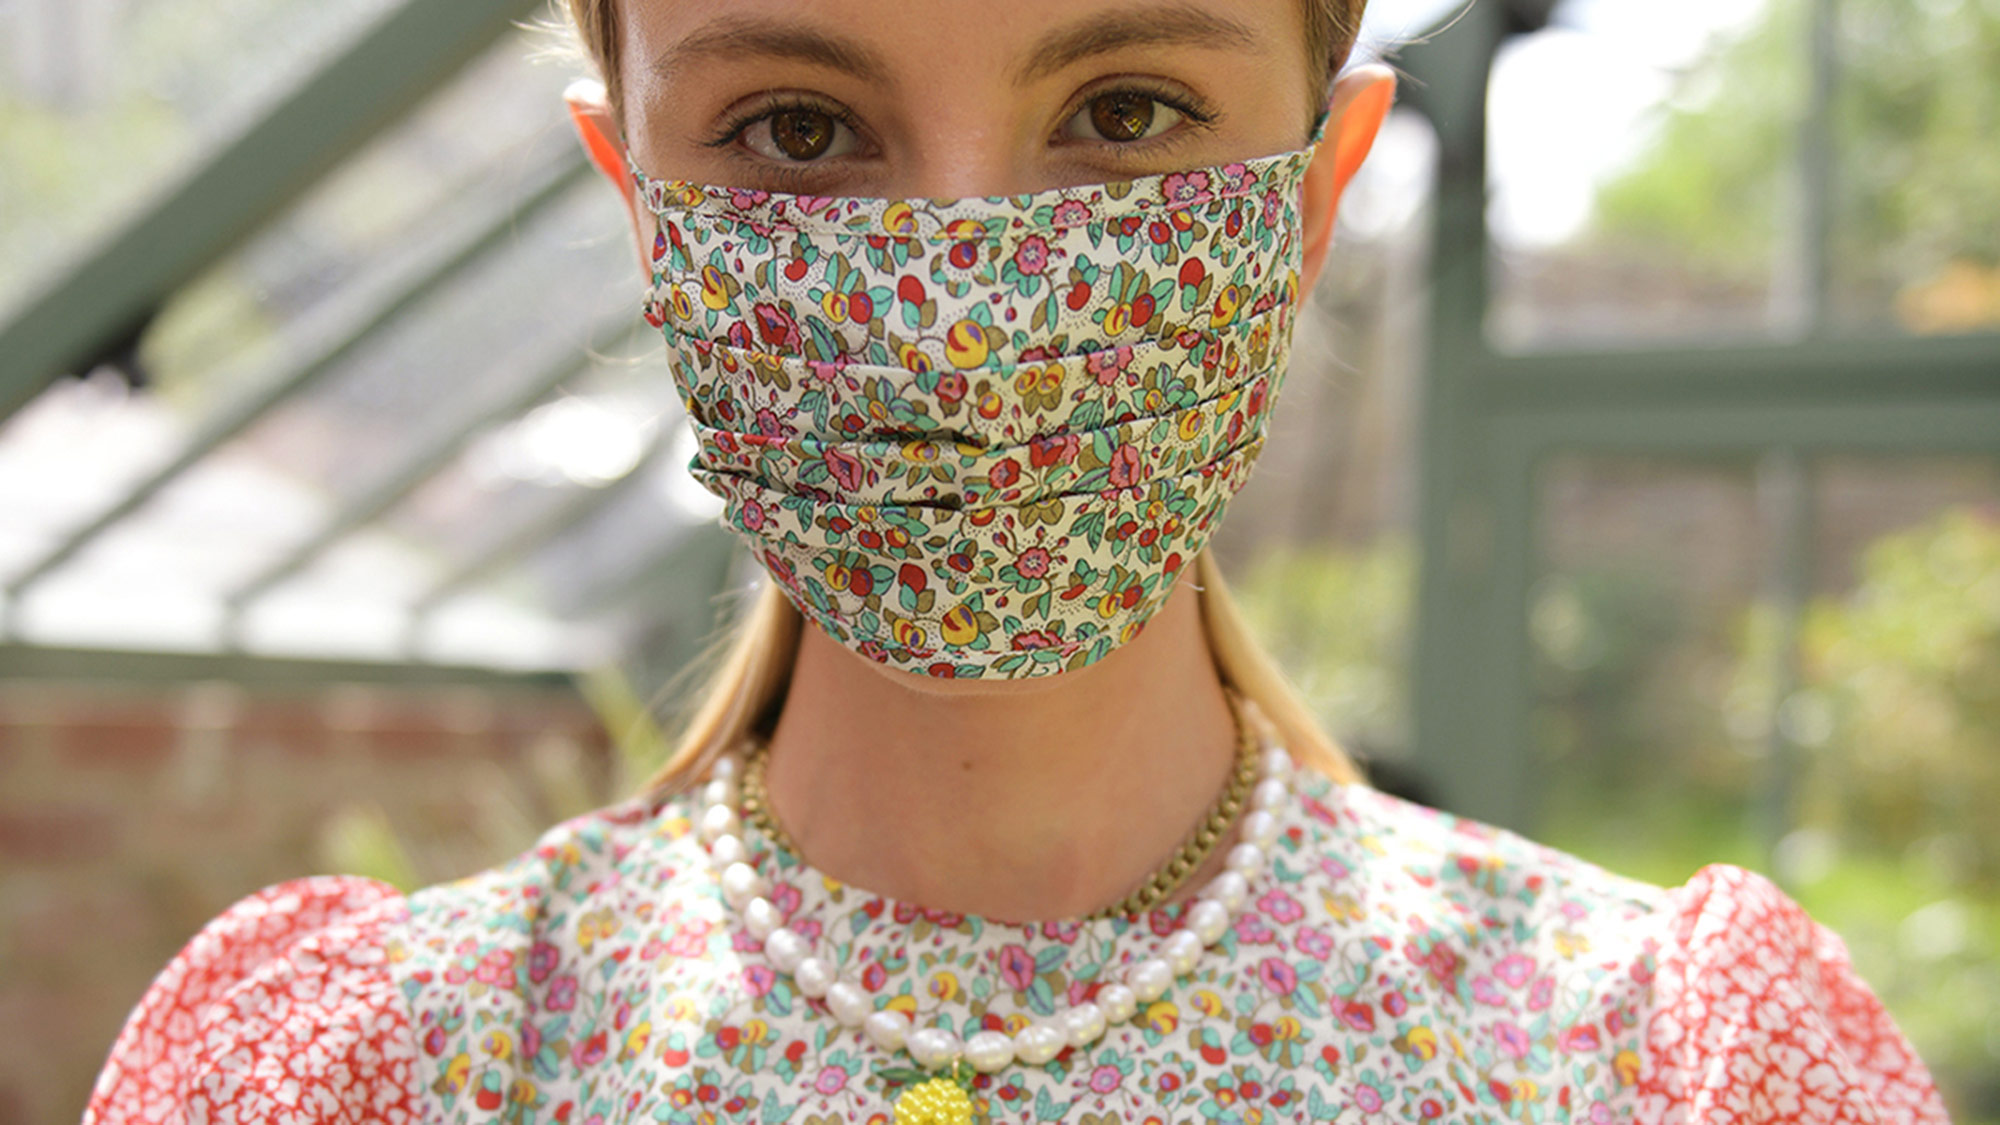 Where to buy reusable fabric face masks right now